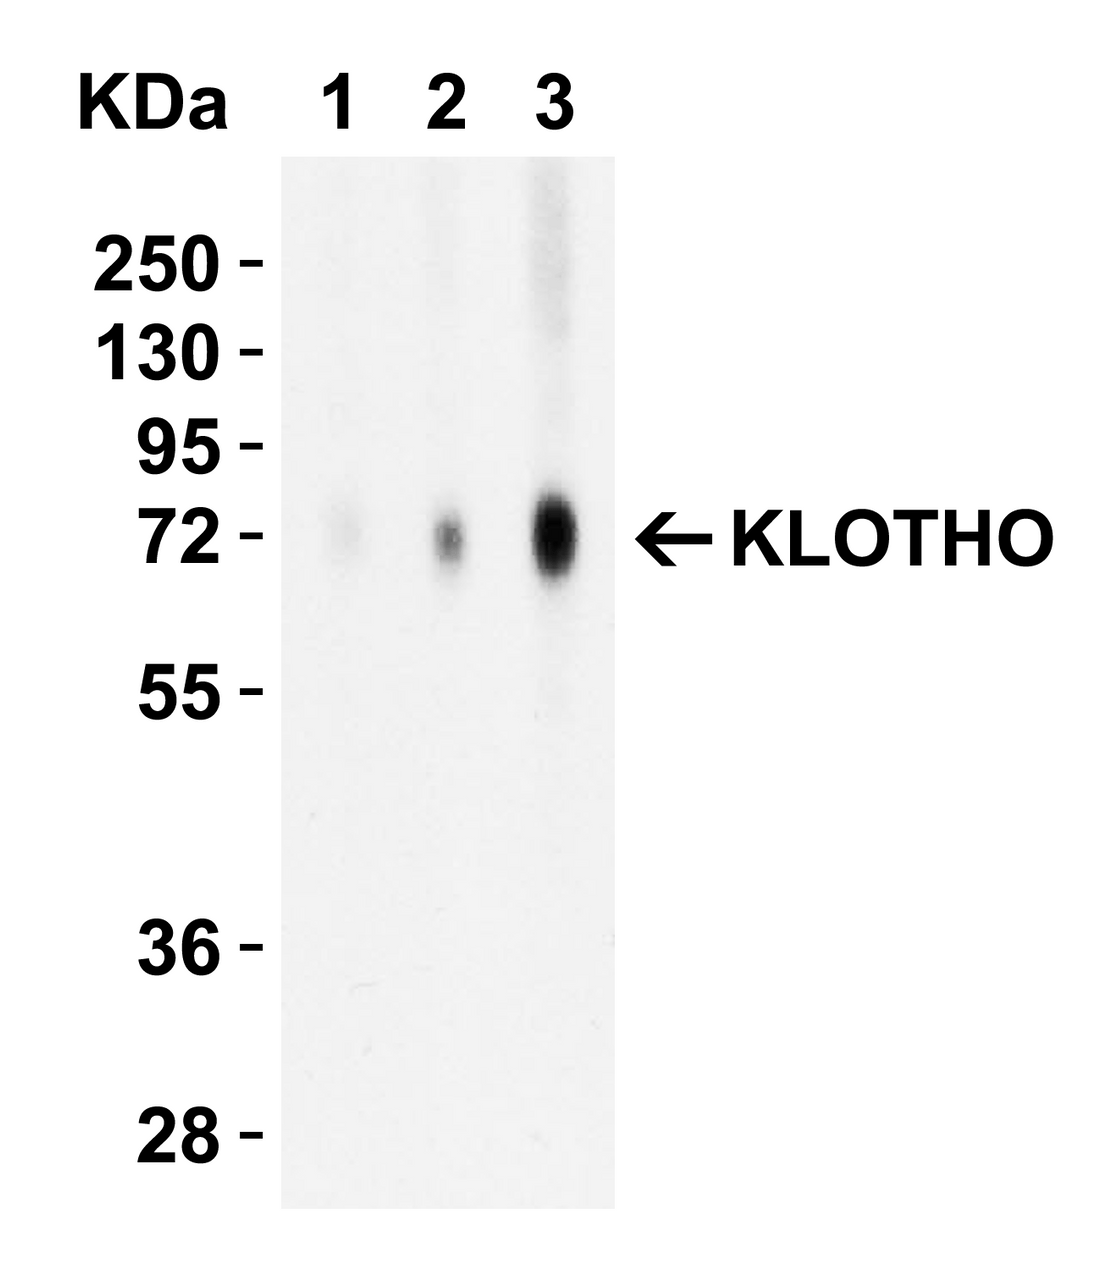 Figure 2 Western Blot Validation with Recombinant Protein
Loading: 30 ng of human KLOTHO recombinant protein per lane.
Antibodies: KLOTHO 6107 (Lane 1: 1 ug/mL, Lane 2: 2 ug/mL and Lane 3: 4 ug/mL) , 1h incubation at RT in 5% NFDM/TBST.
Secondary: Goat anti-rabbit IgG HRP conjugate at 1:10000 dilution.
Observed at around 72kD.